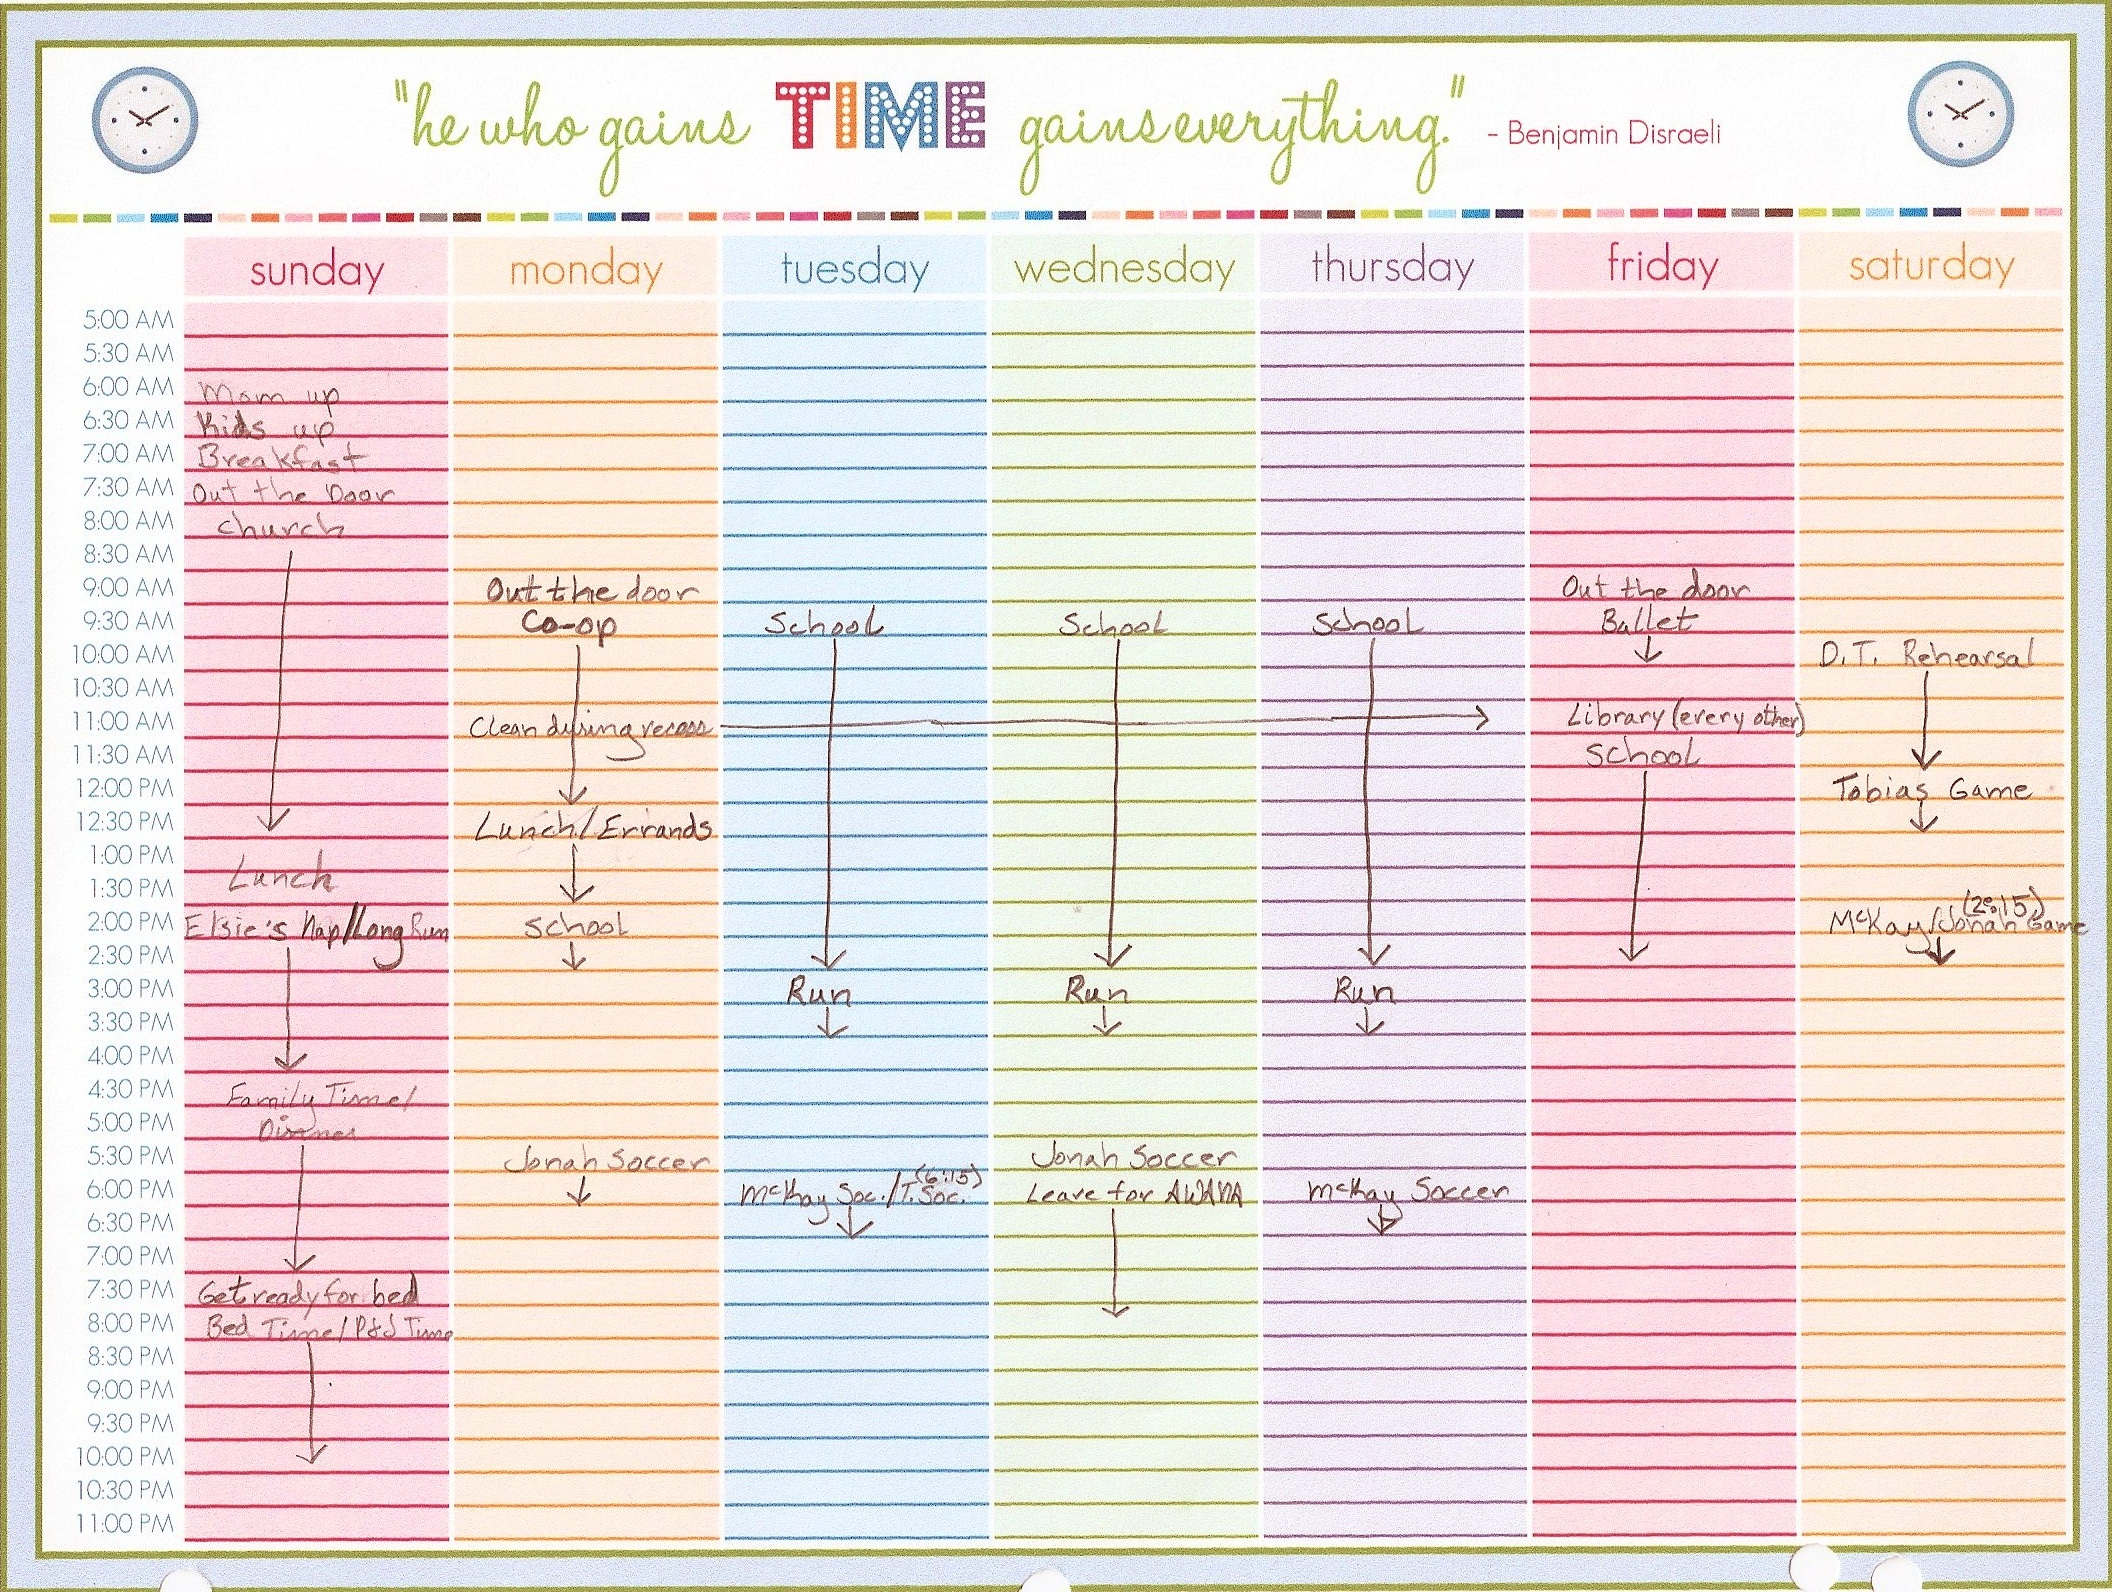 Free Calendar Template With Time Slots | Calendar Template within Weekly Calendar With Time Slots